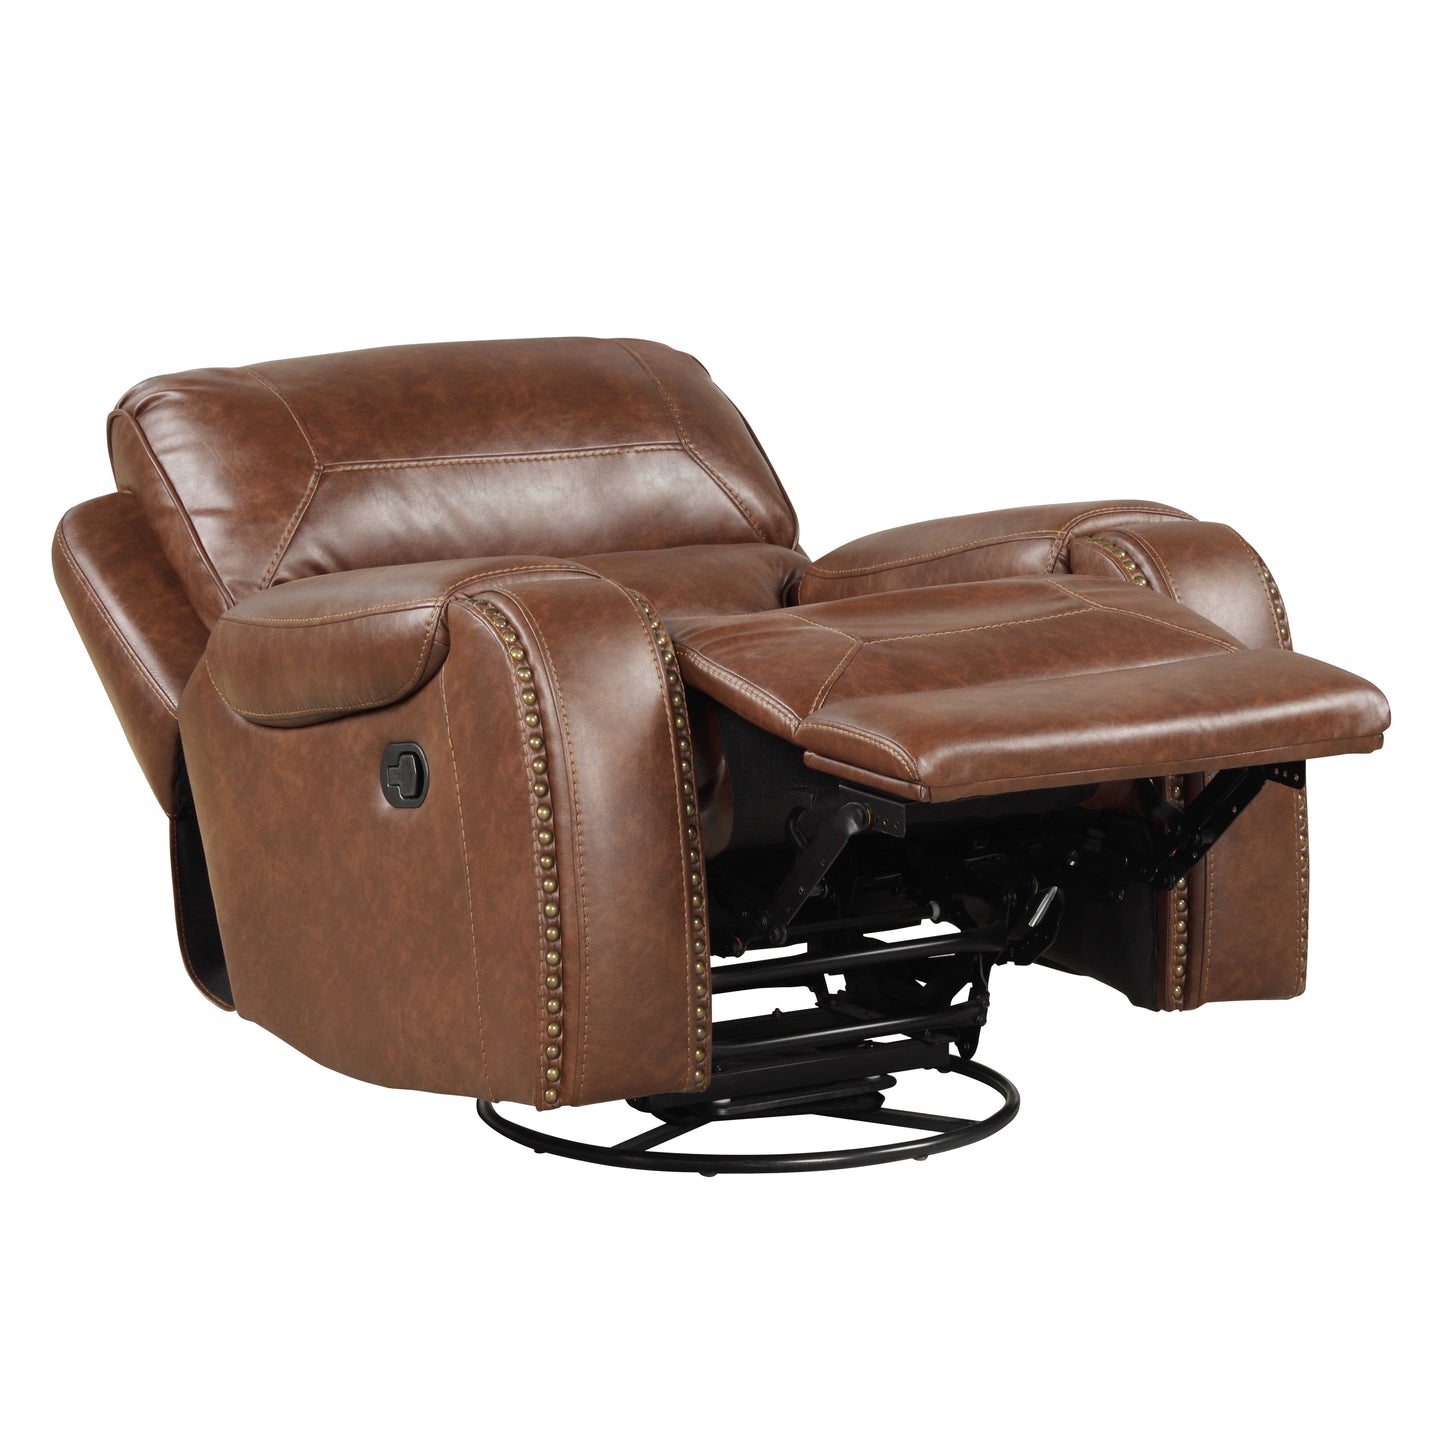 Achern Brown Leather-Air Nailhead Manual Reclining Living Room Collection